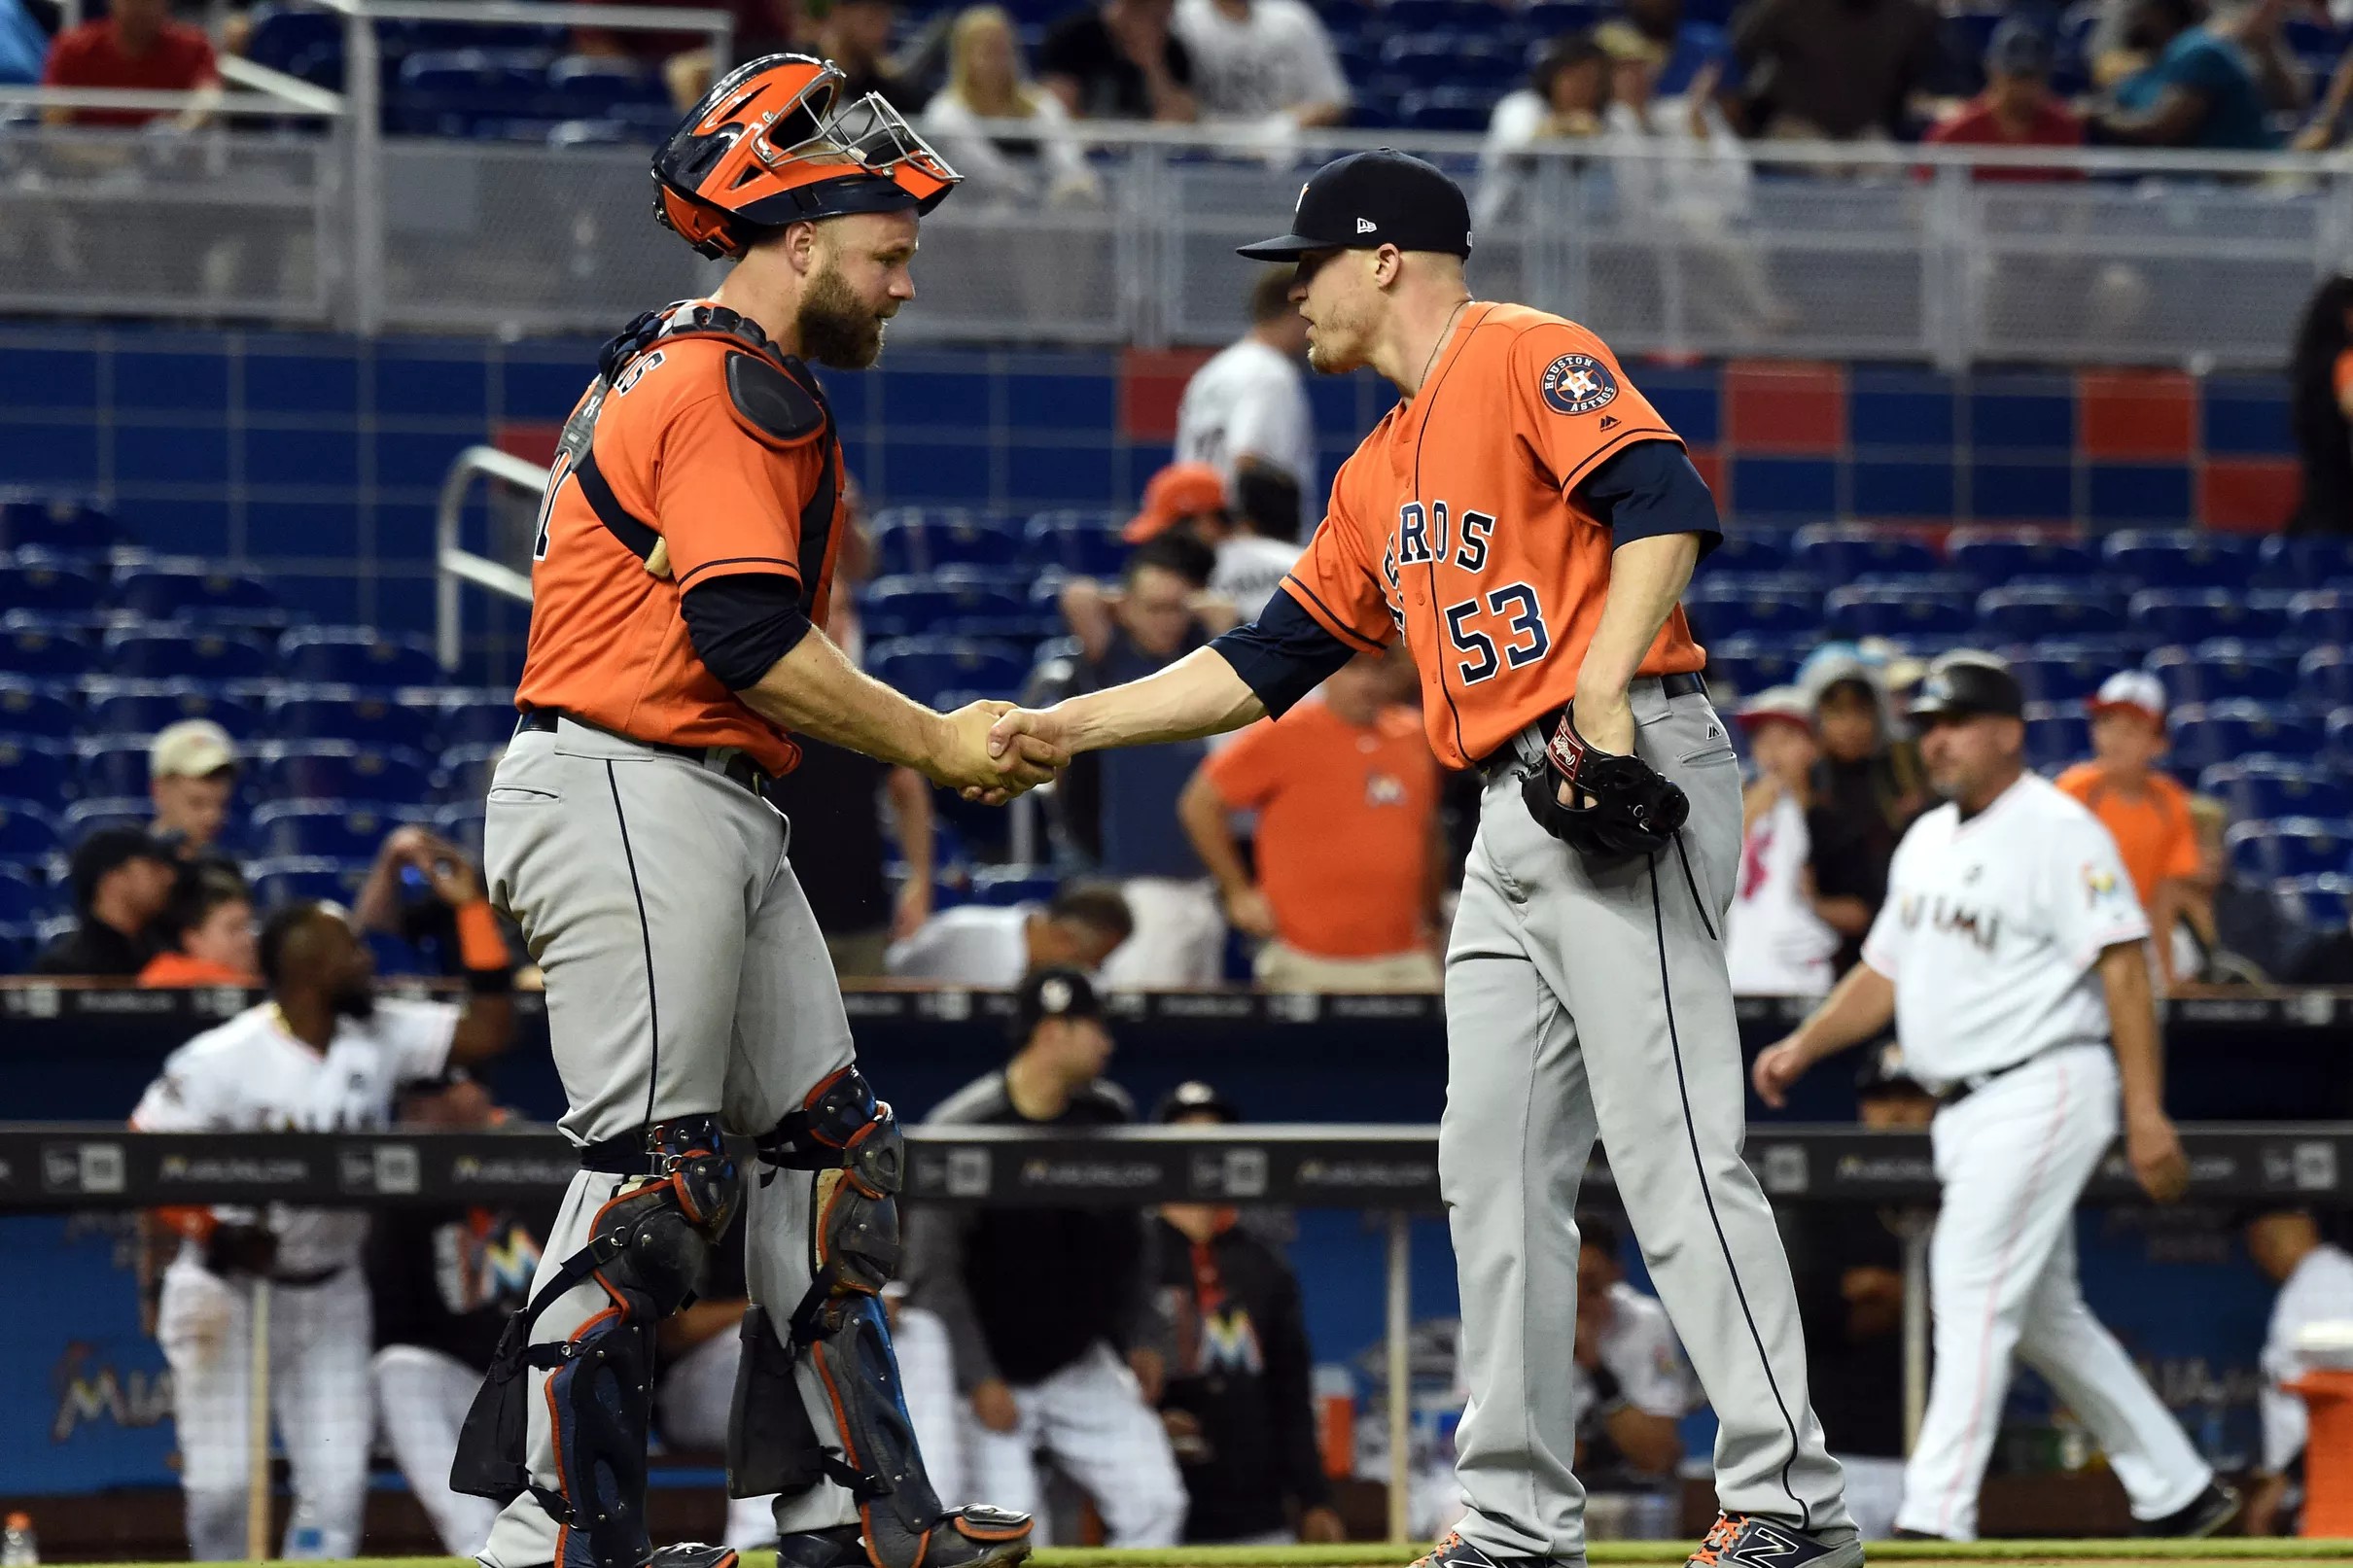 Astros 3, Marlins 0 Let the Good Times Roll